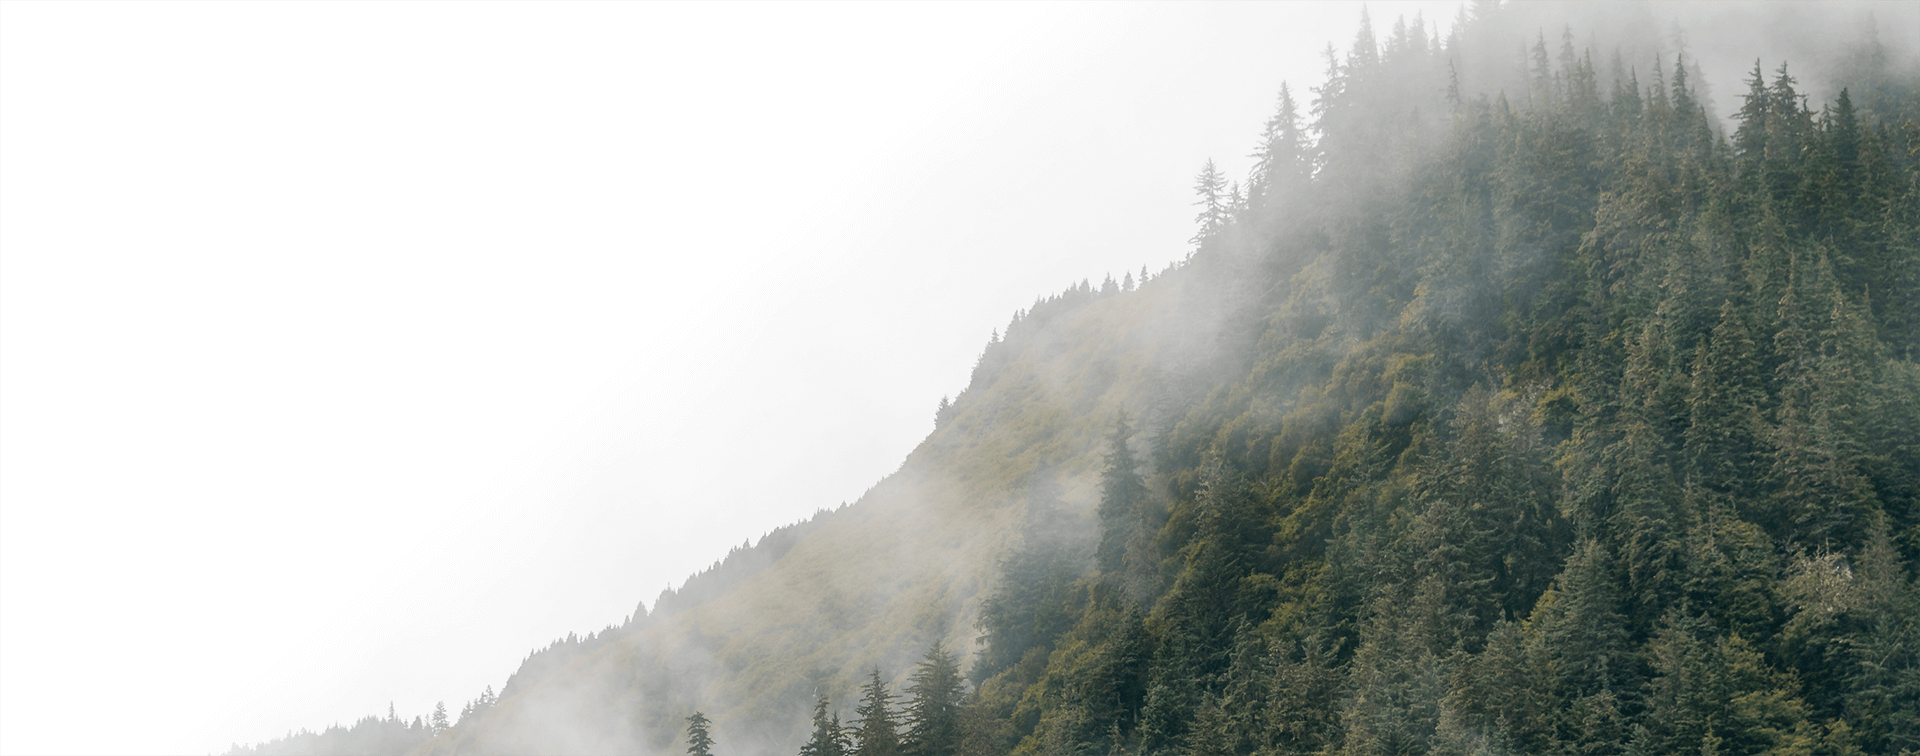 Foggy mountainside with forrest 